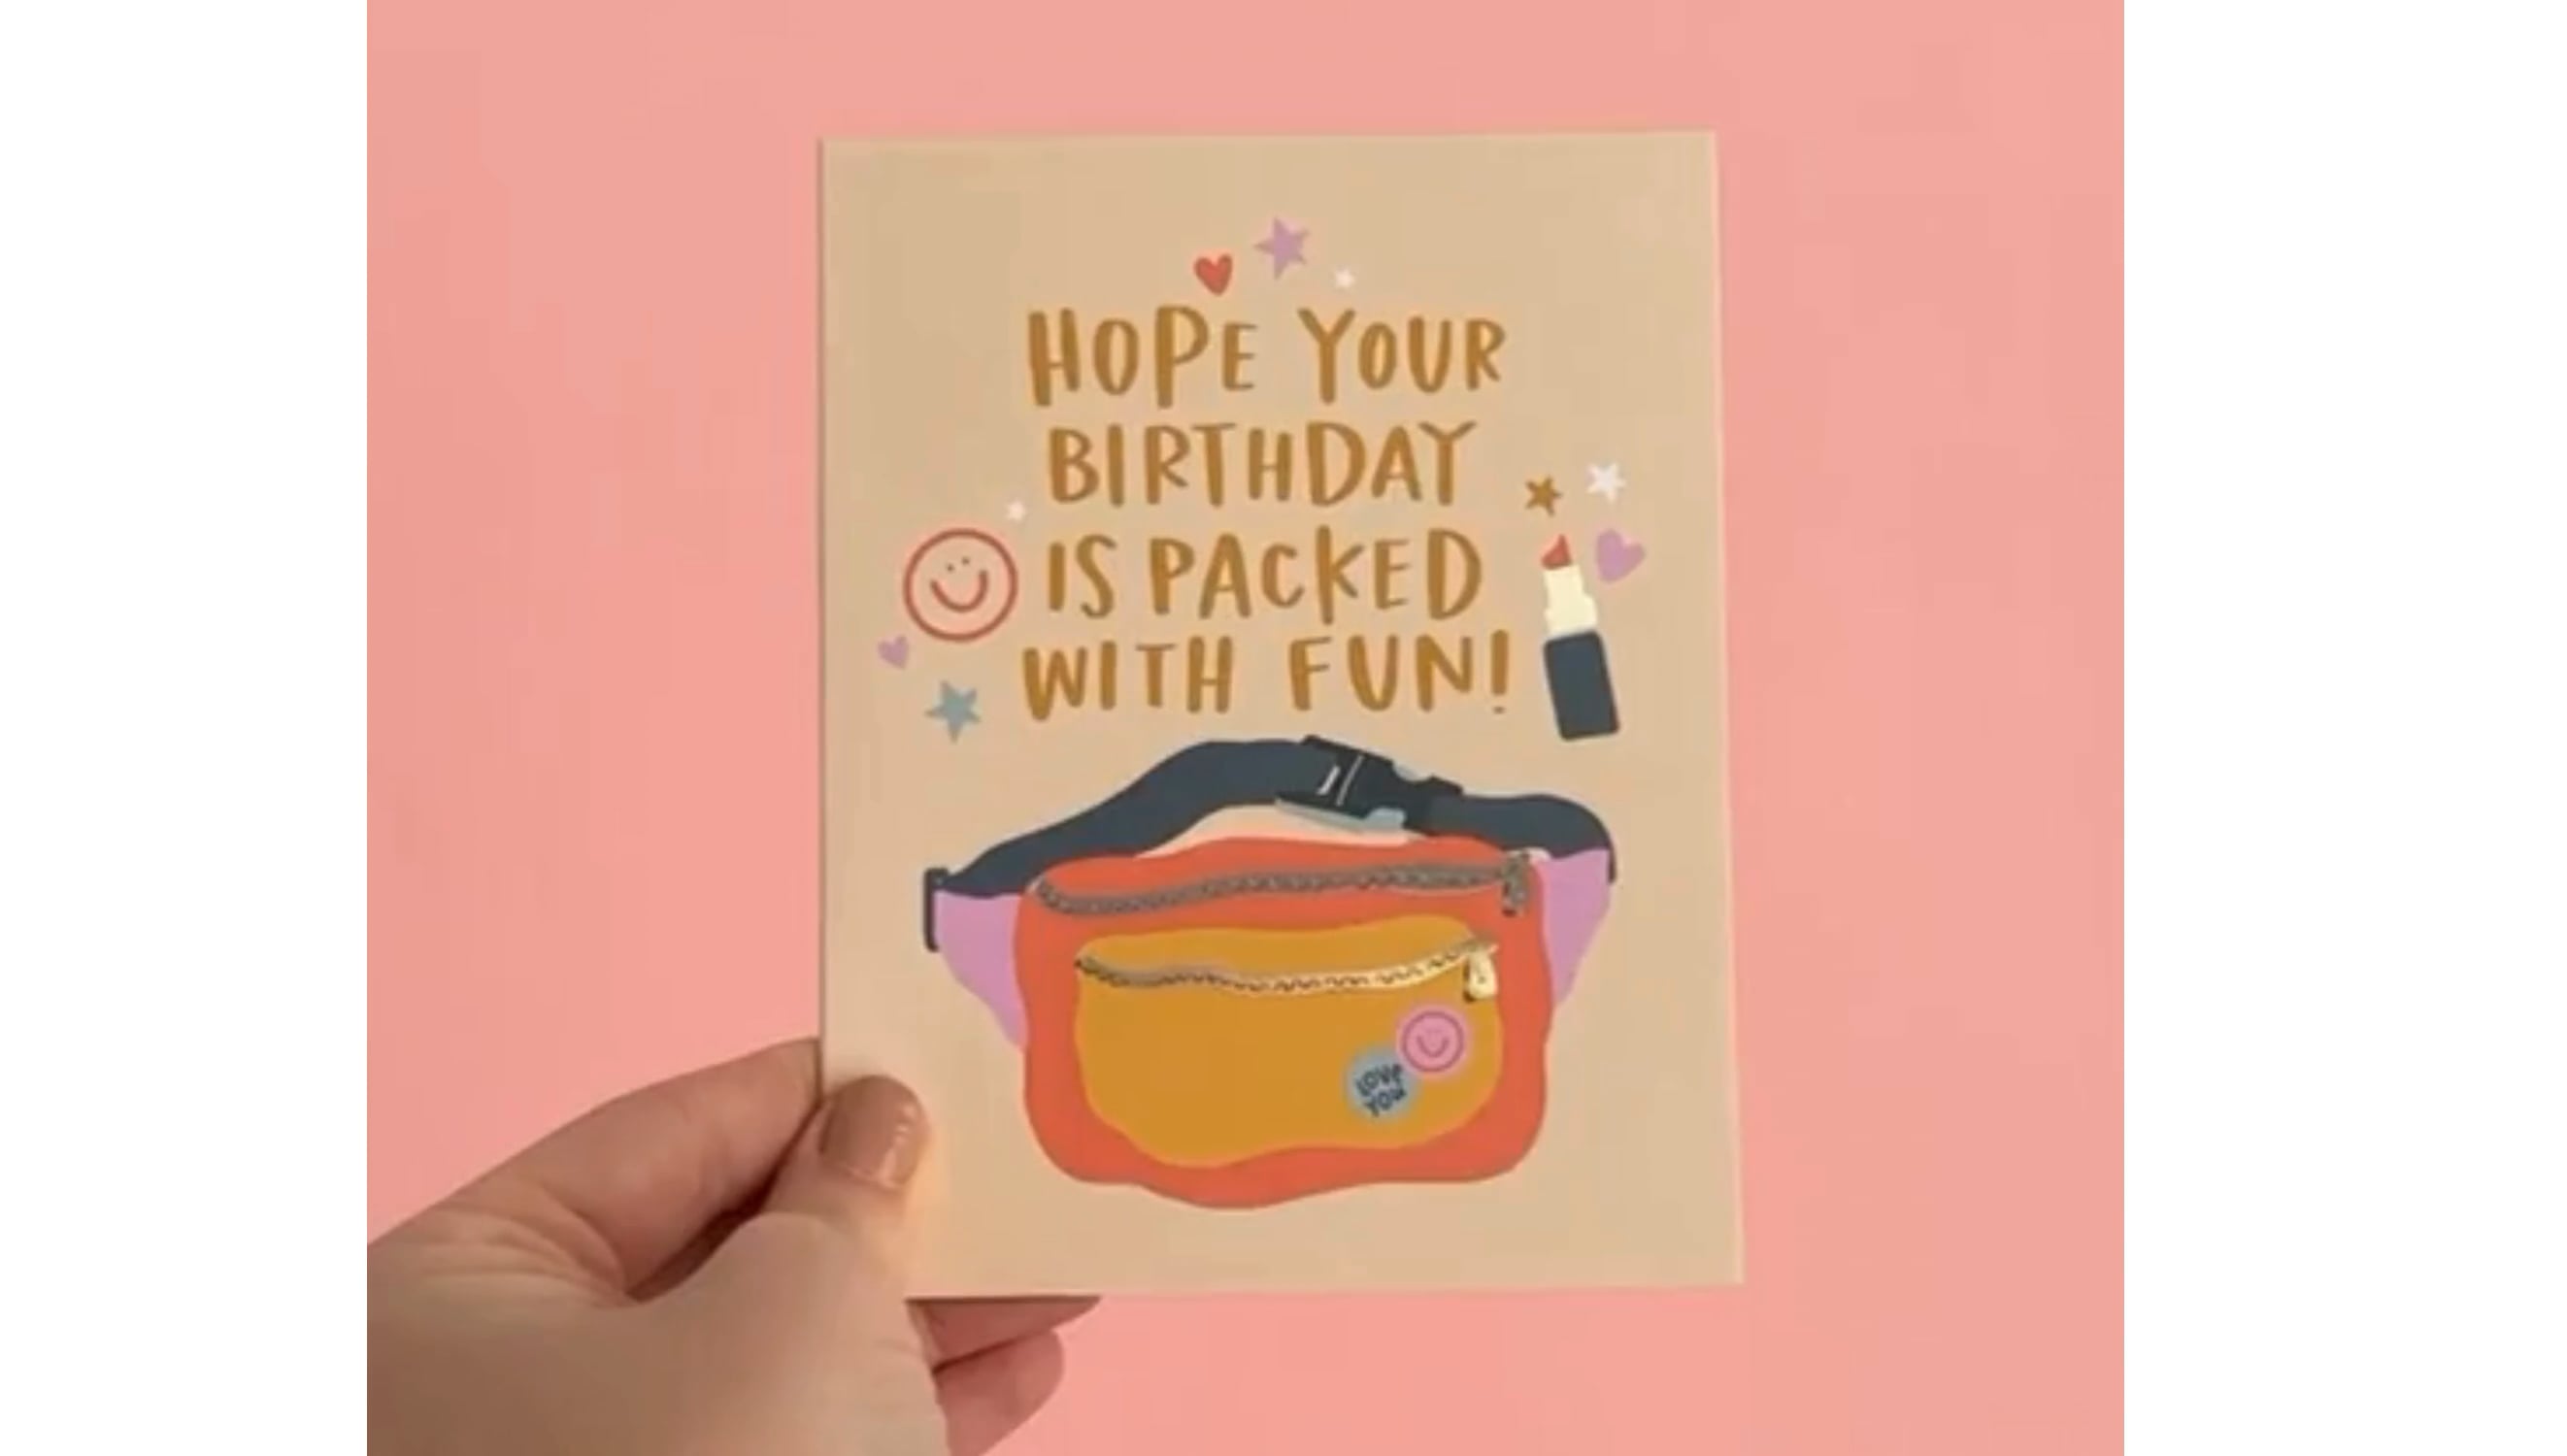 Packed with Fun Birthday Greeting Card video